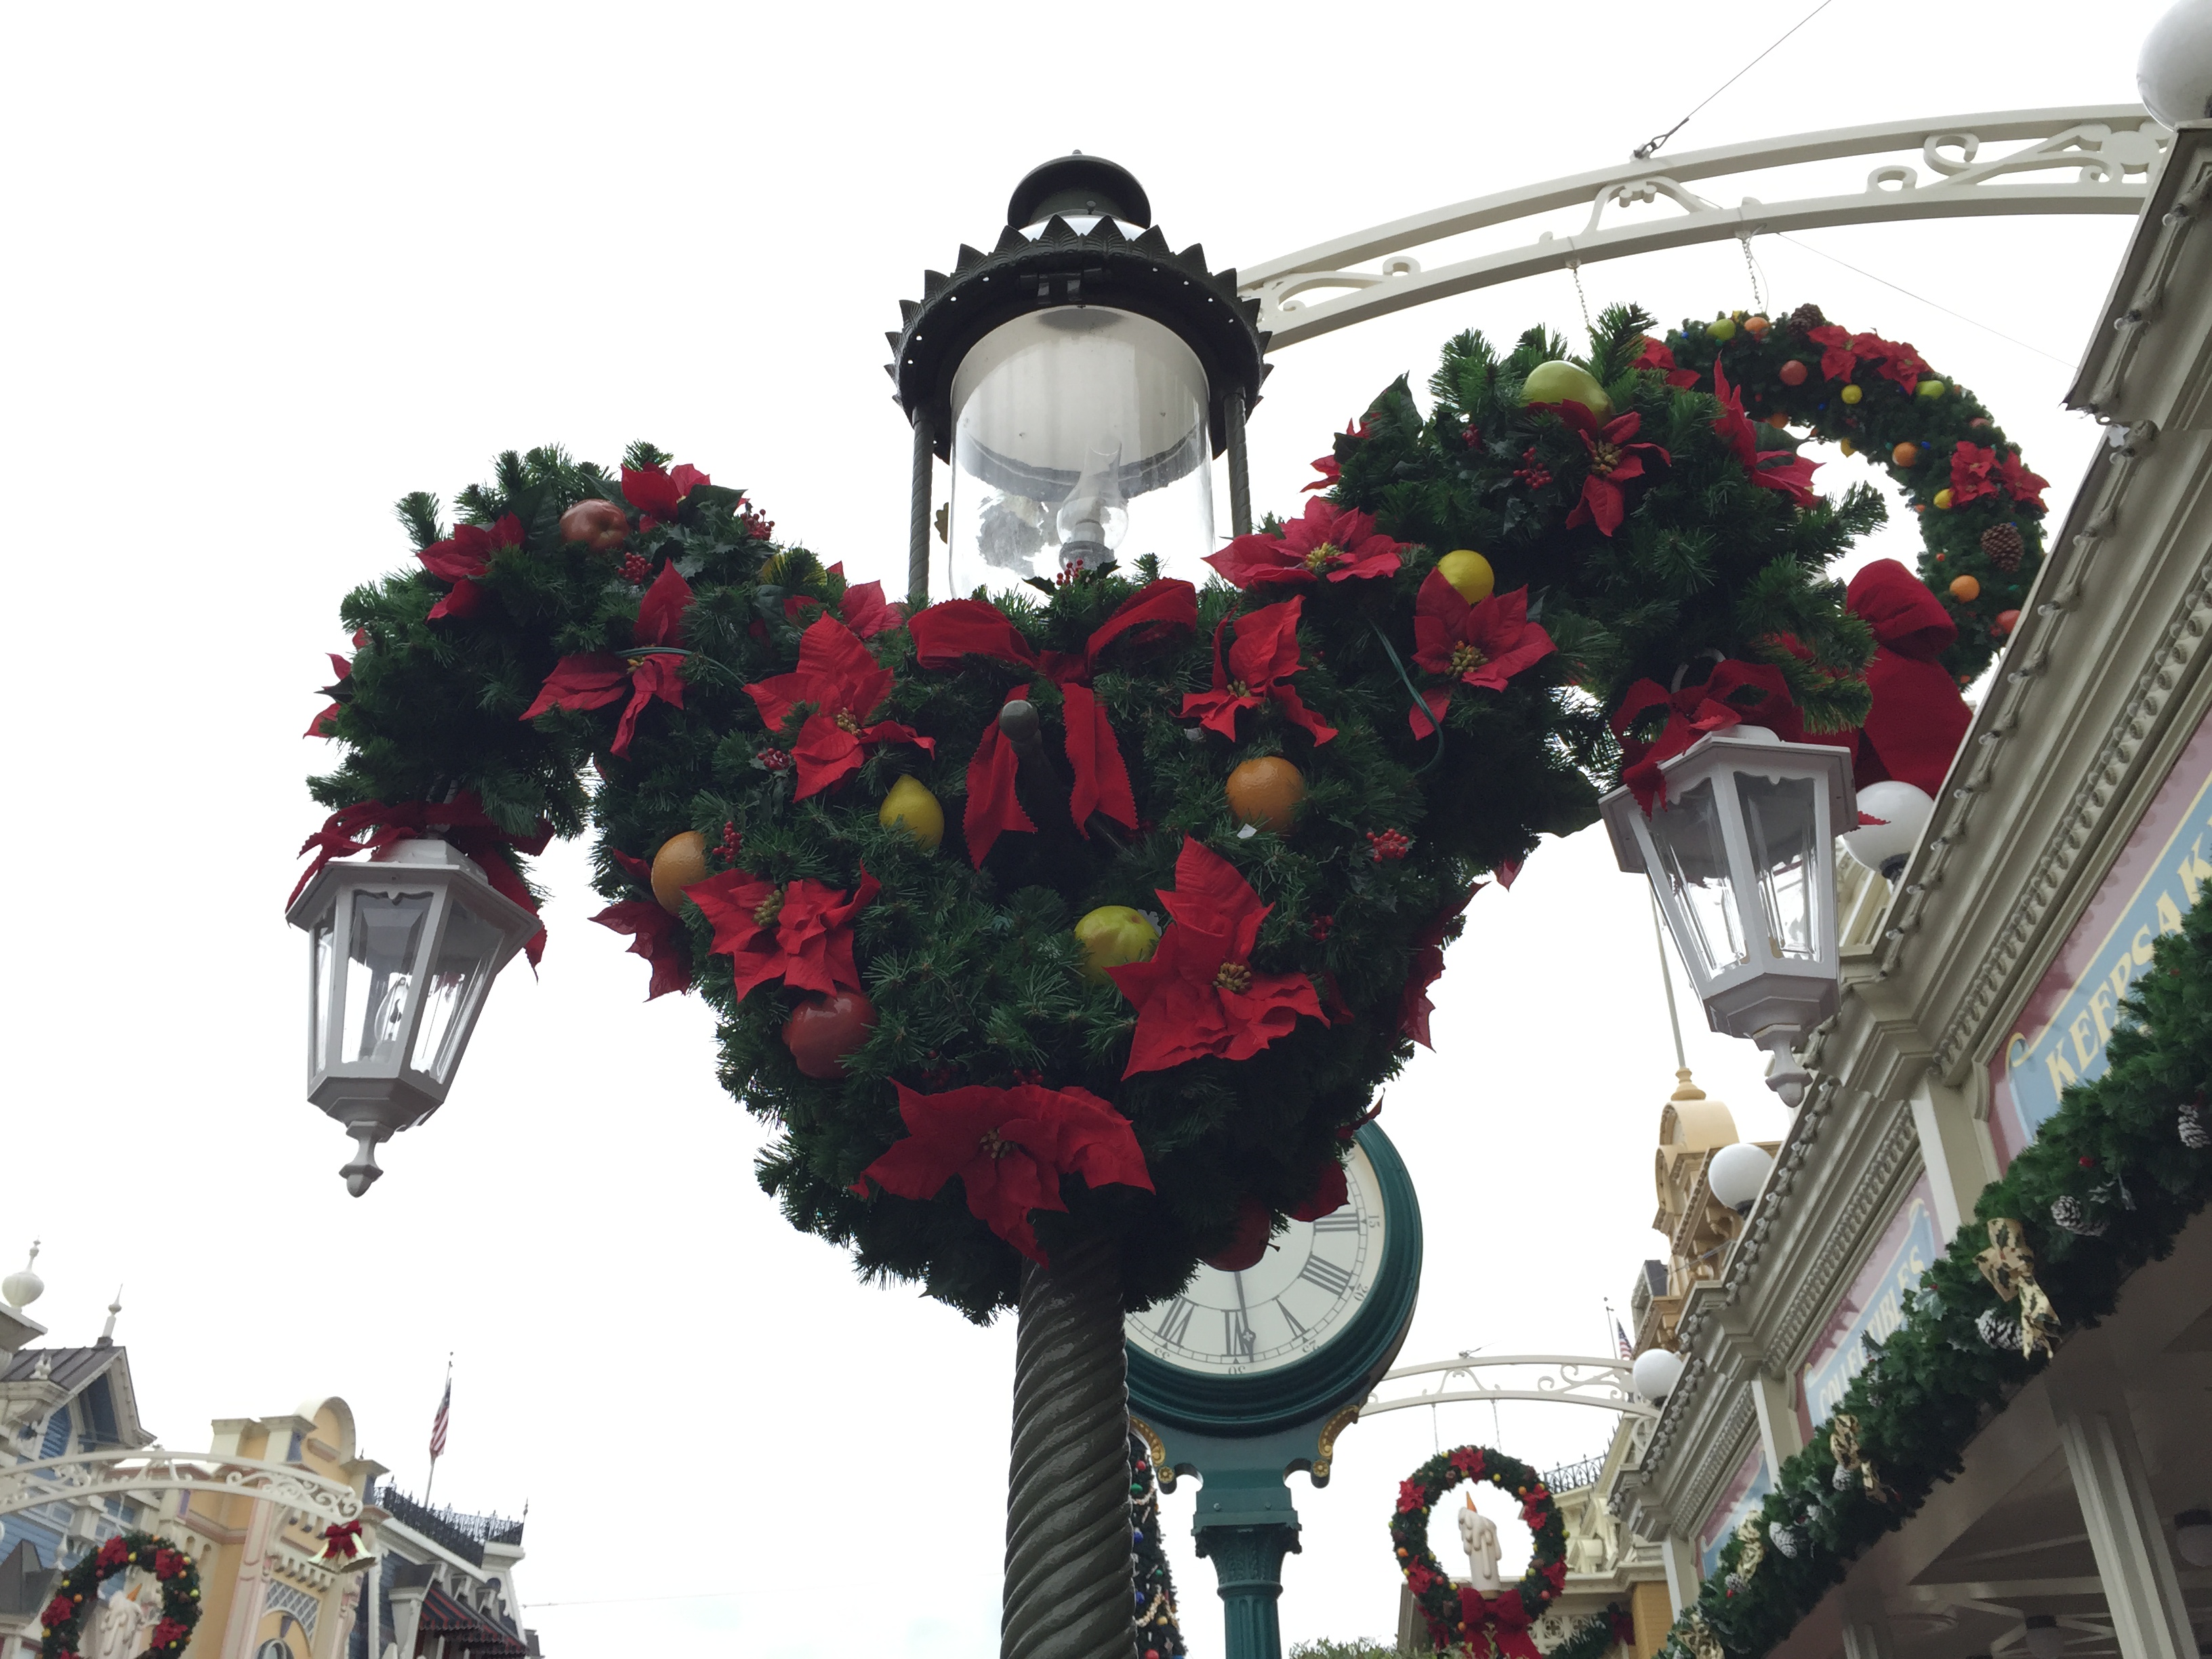 Christmas at Walt Disney World-A Celebration in Pictures